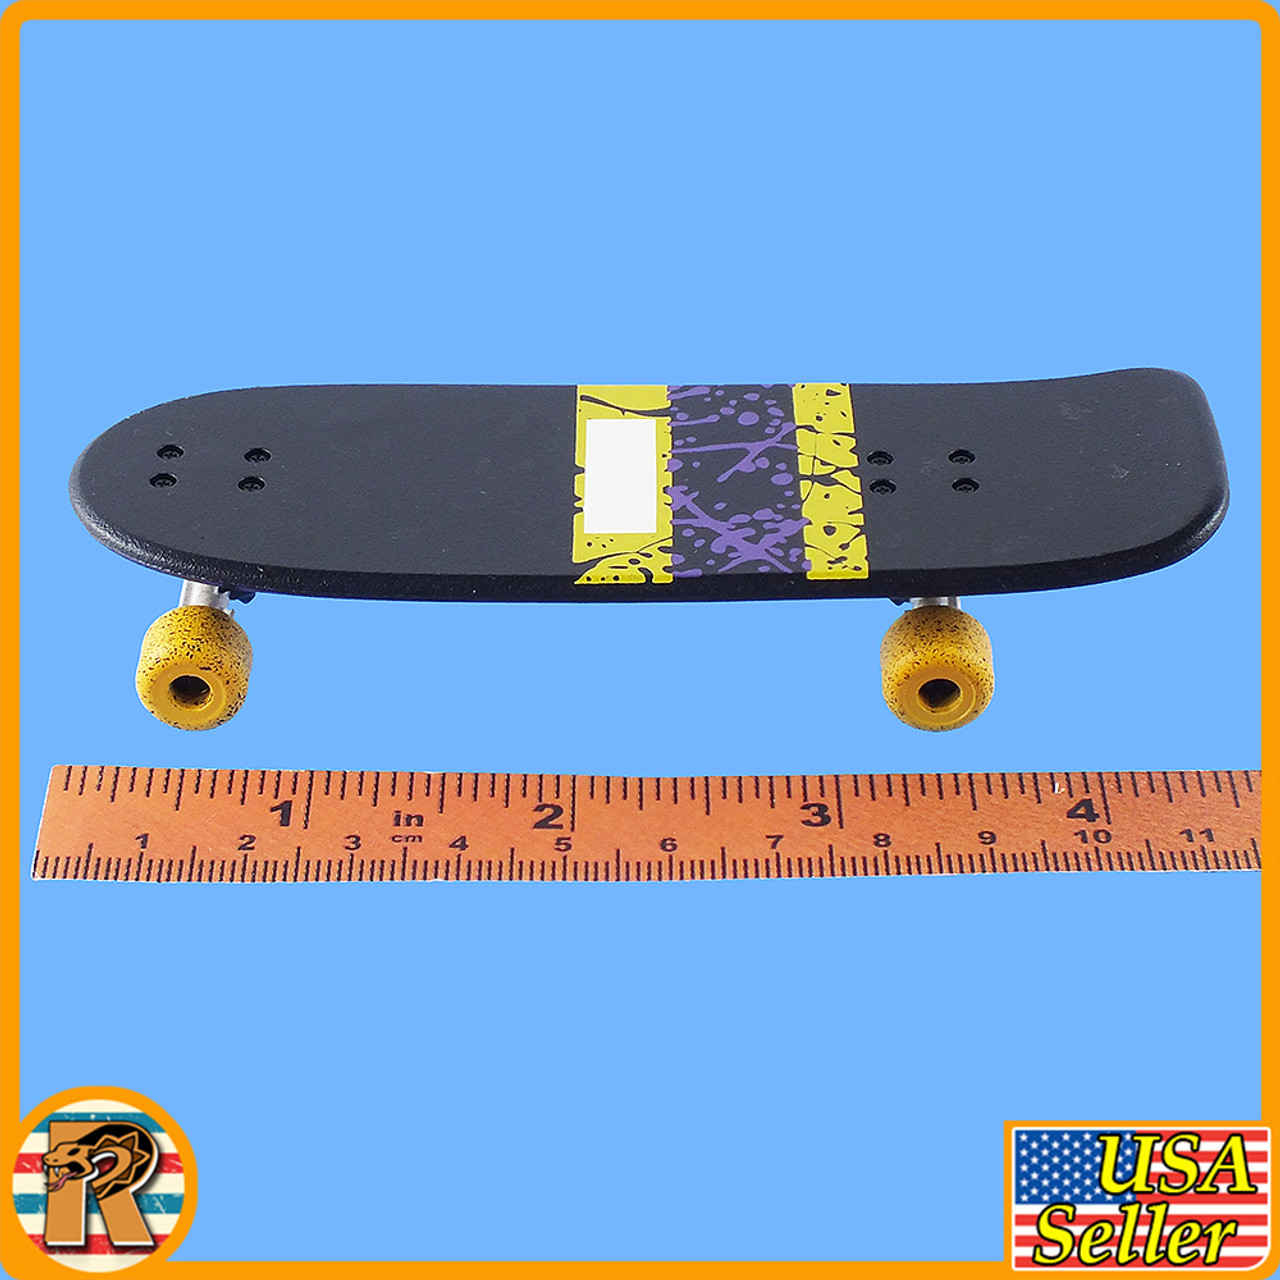 Time Travel Marty - Skateboard - 1/6 Scale -